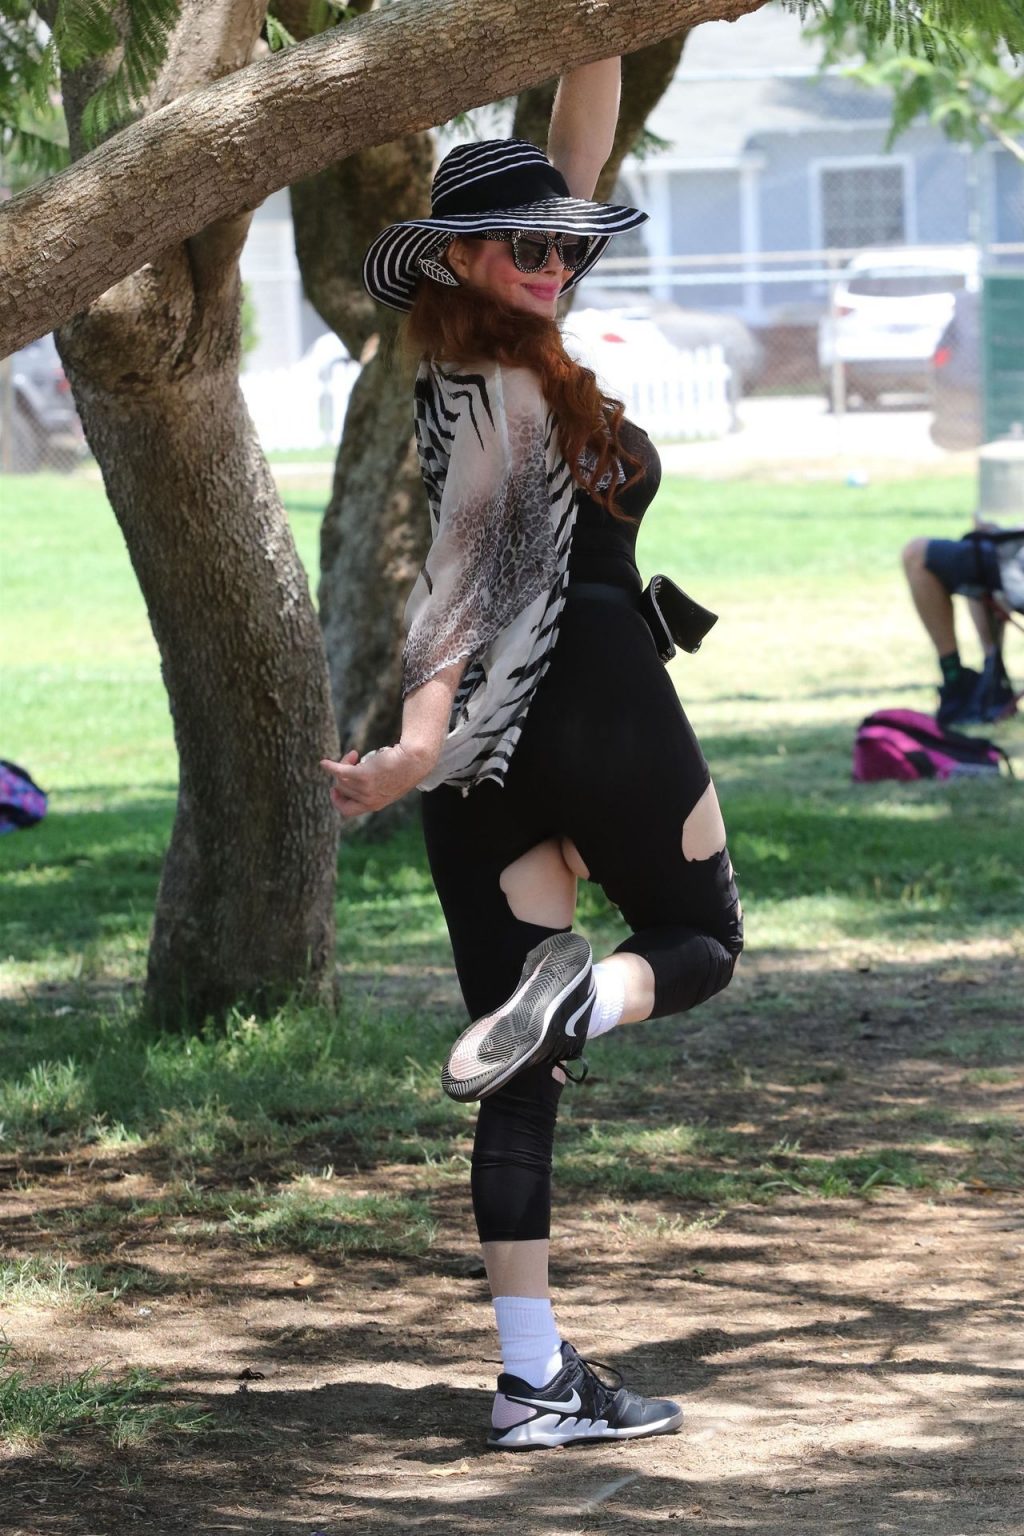 Phoebe Price Attends Tennis Practice in Ripped Up Leggings at the Park (45 Photos)